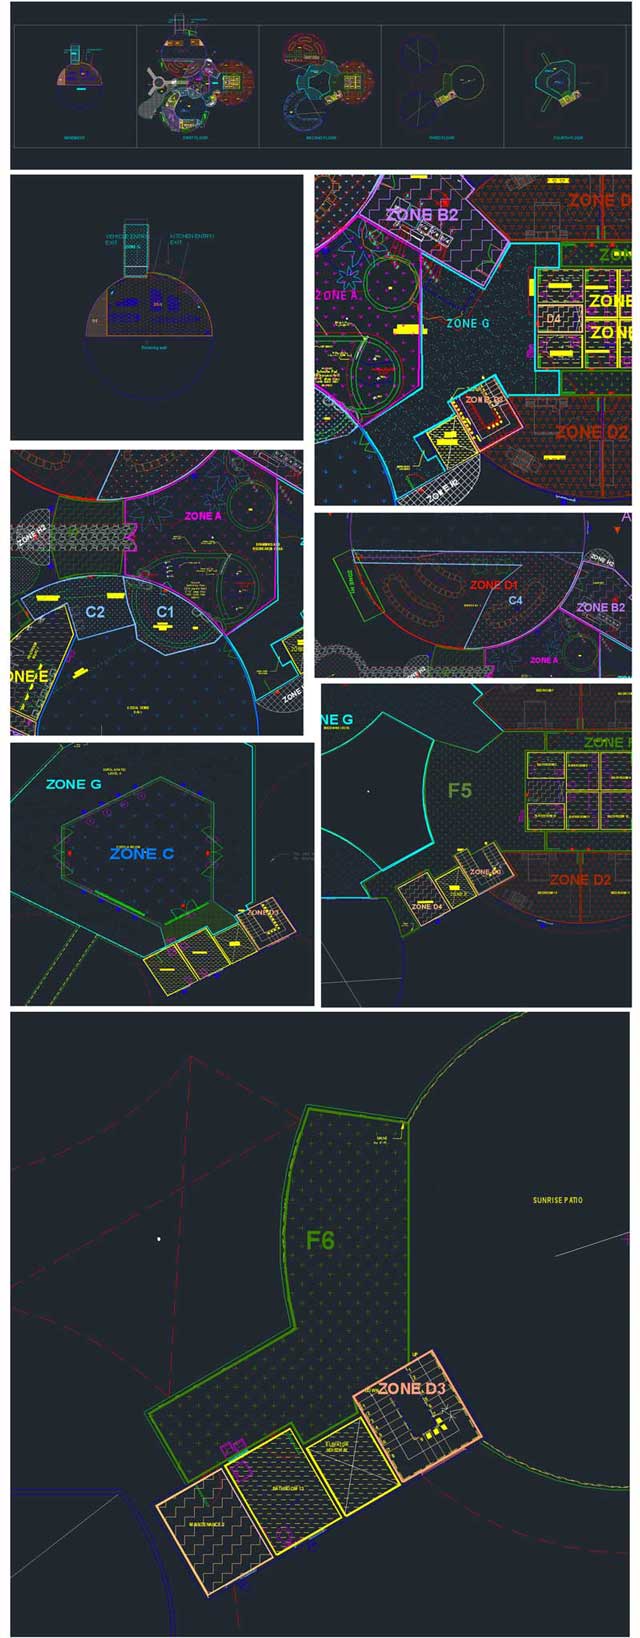 Dipti Dhondarkar, (Electrical Engineer) also continued with her 14th week of work on the lighting zones. This week’s progress continued with final revisions and defining of the zones as shown here. We’d say we are now 95% complete with this component of the City Center.